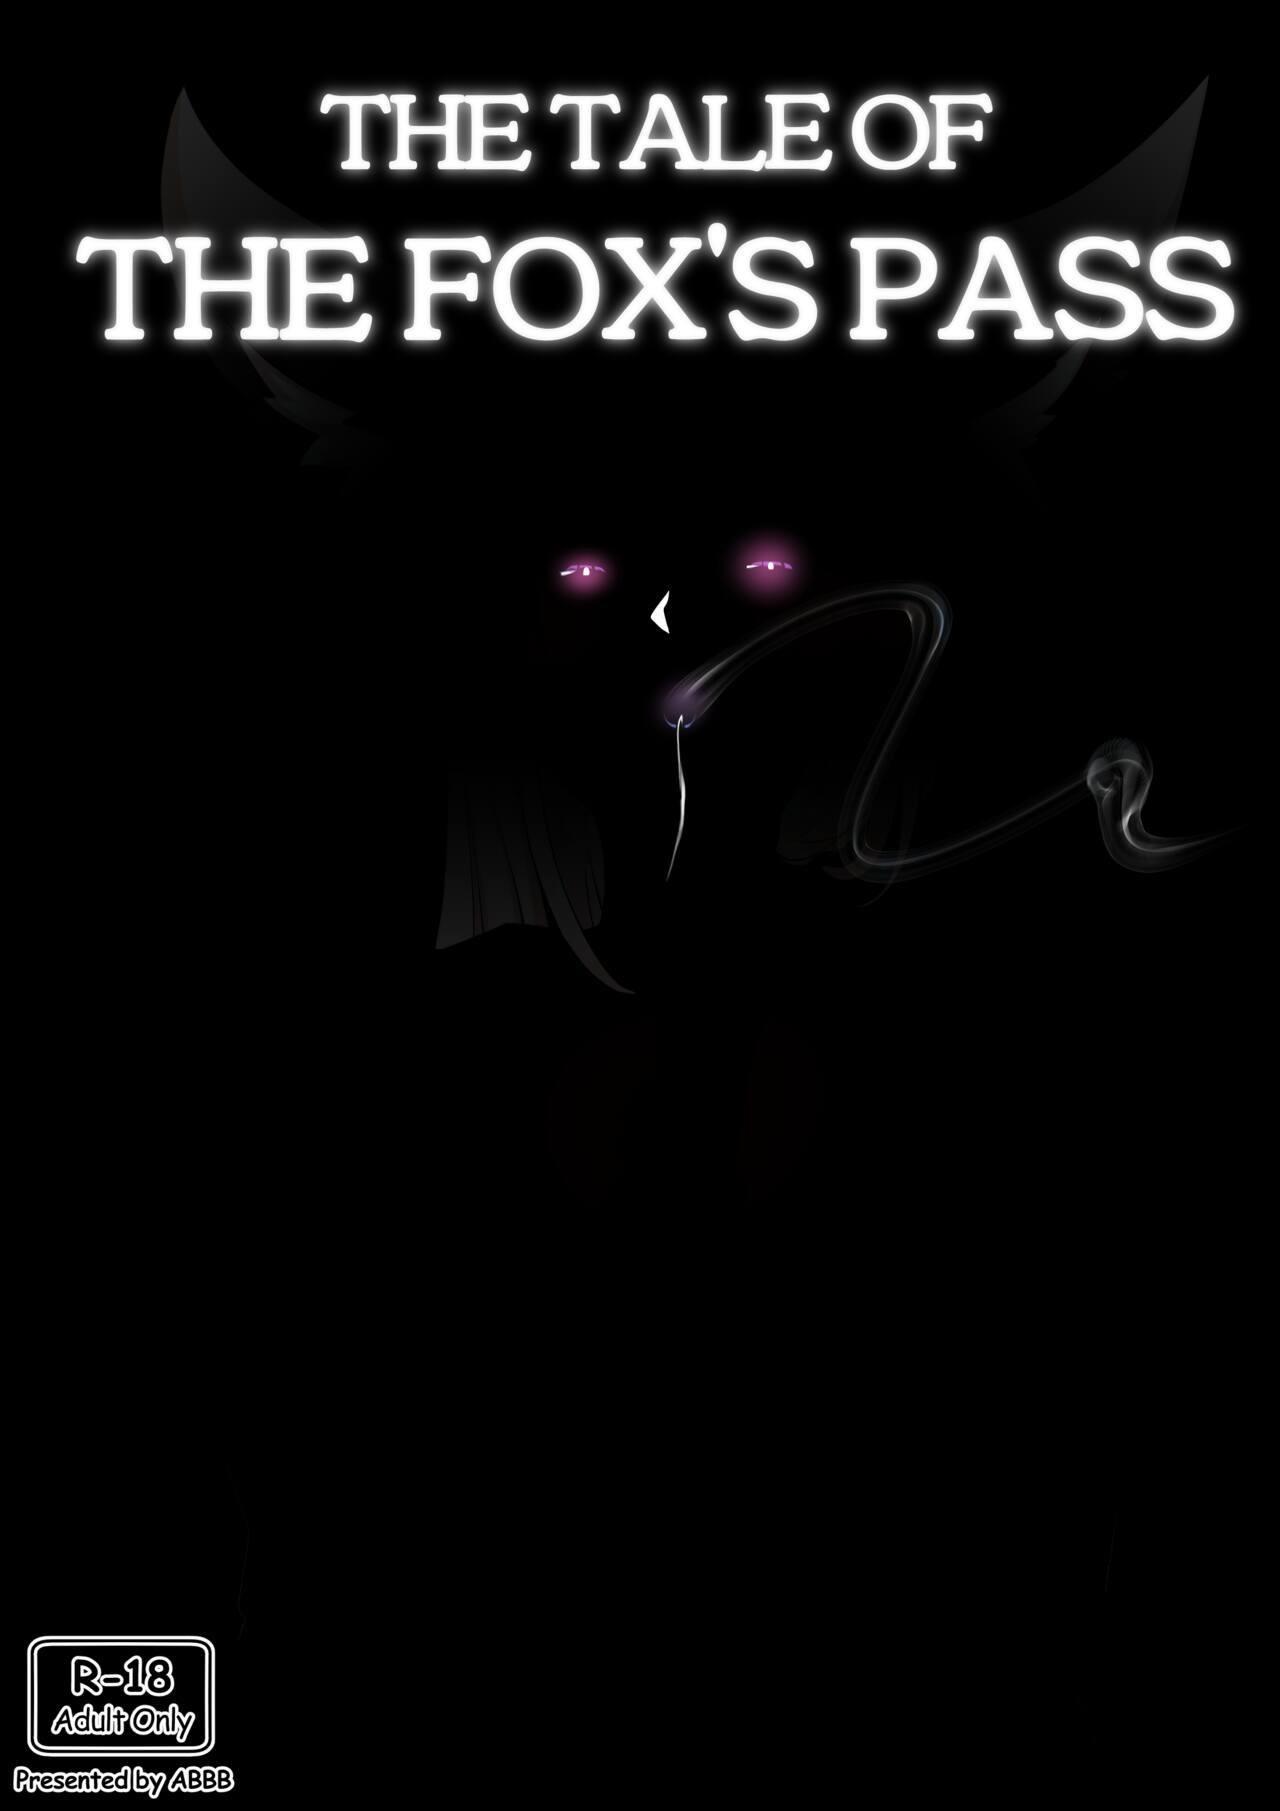 The tale of the fox's pass 25